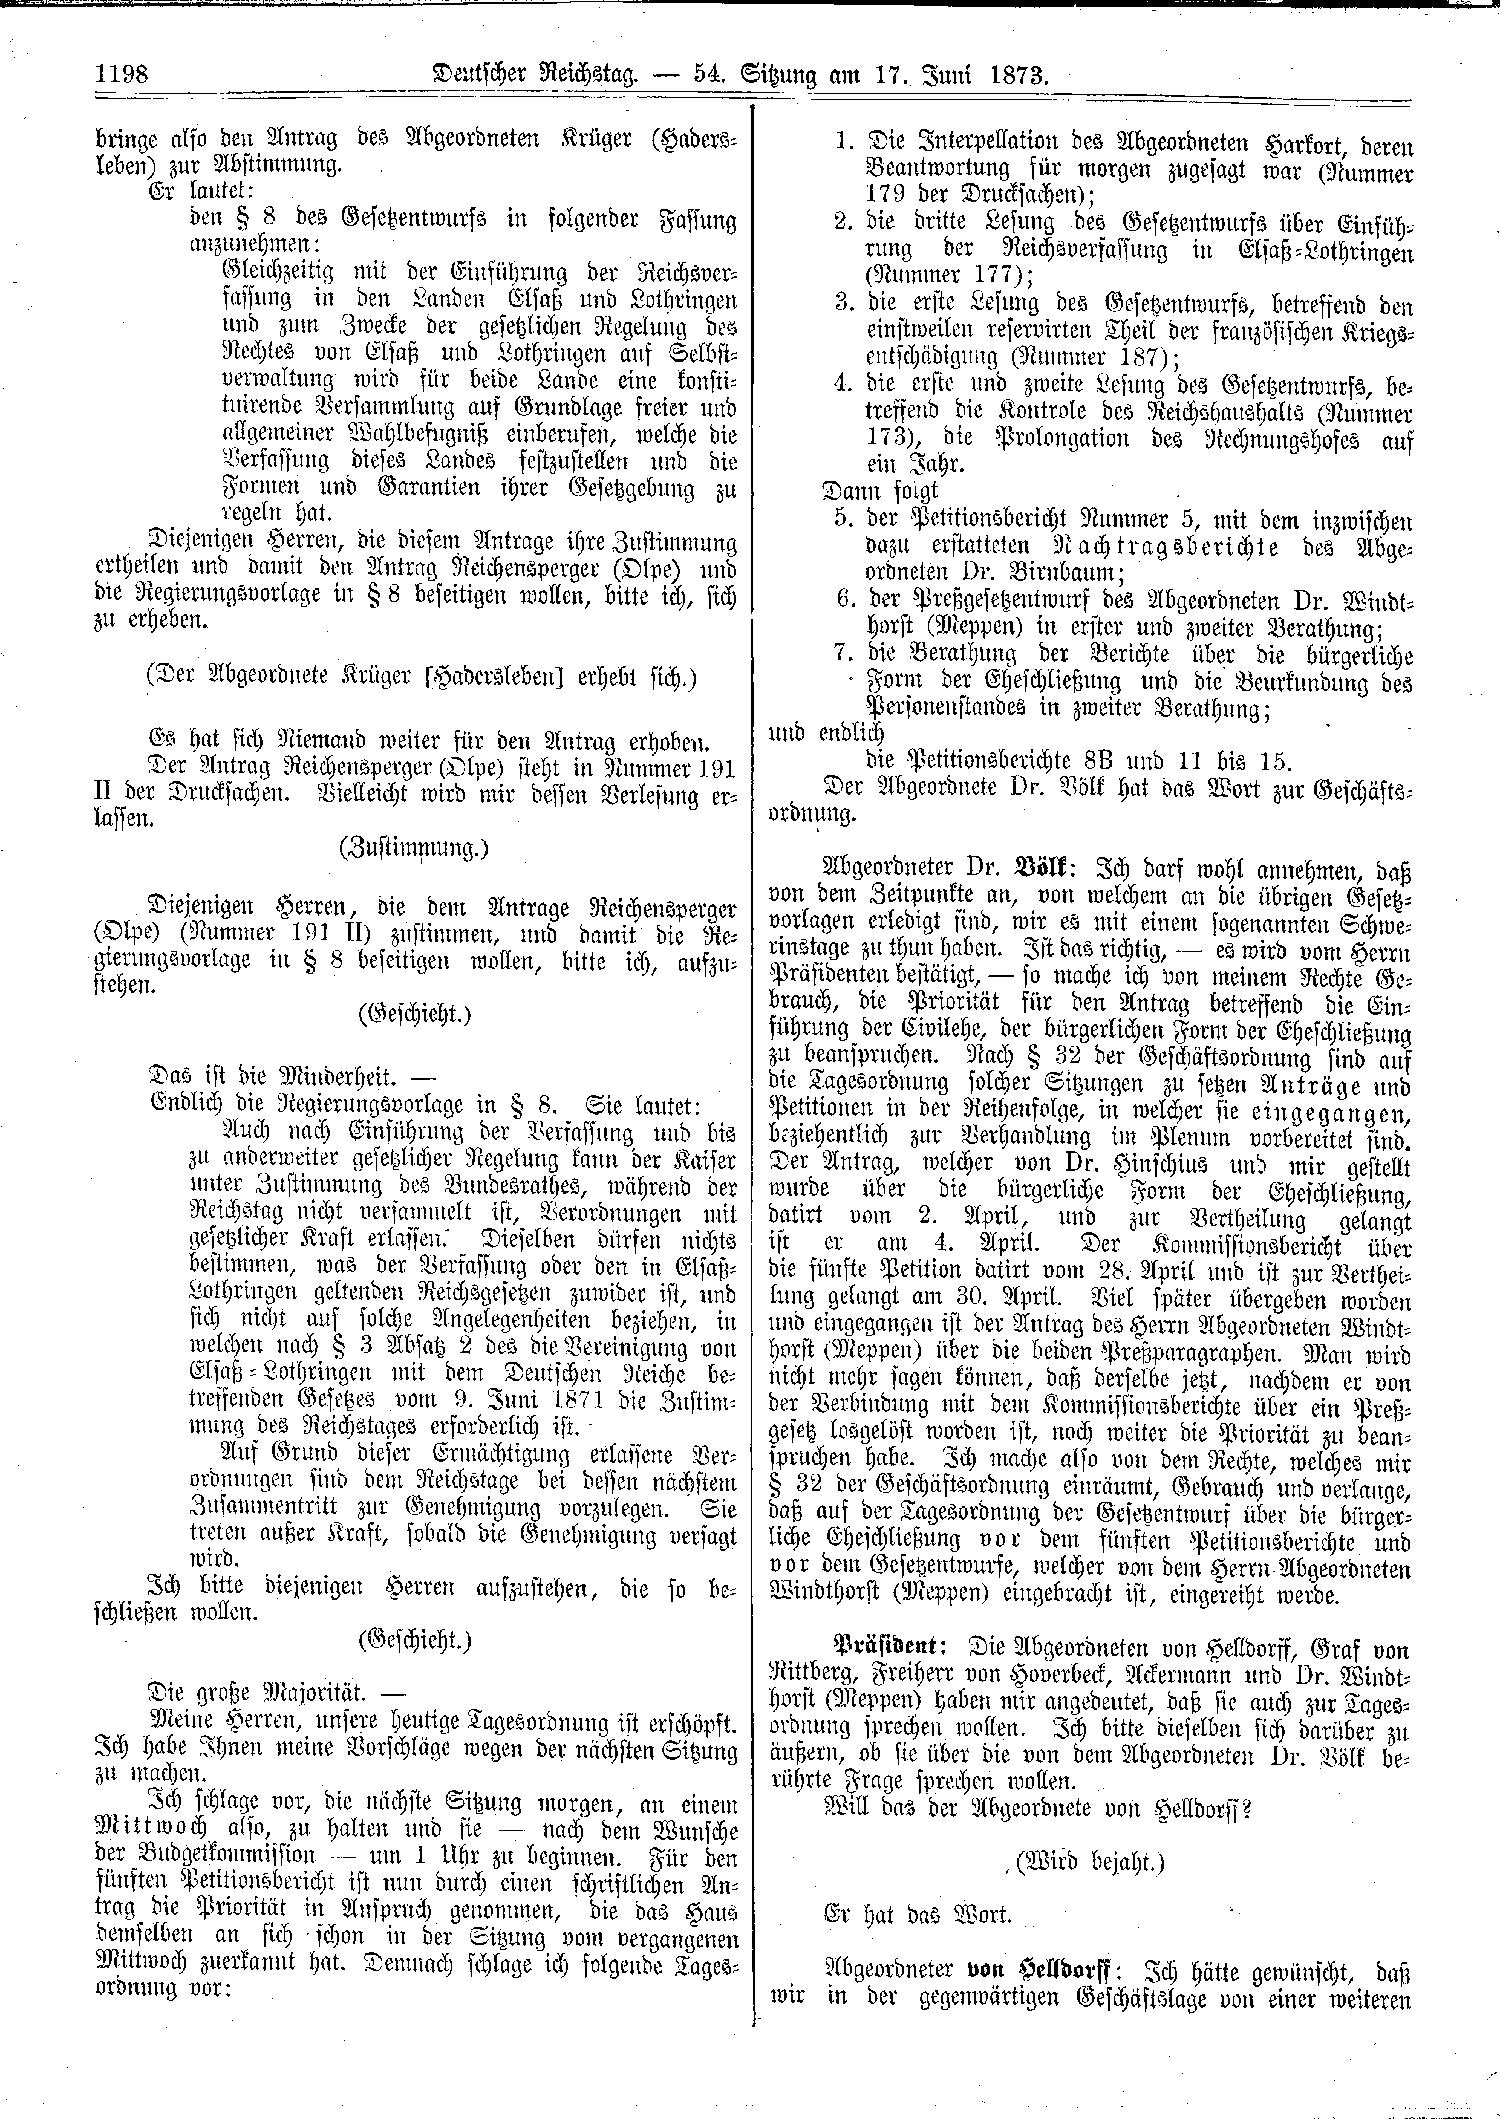 Scan of page 1198